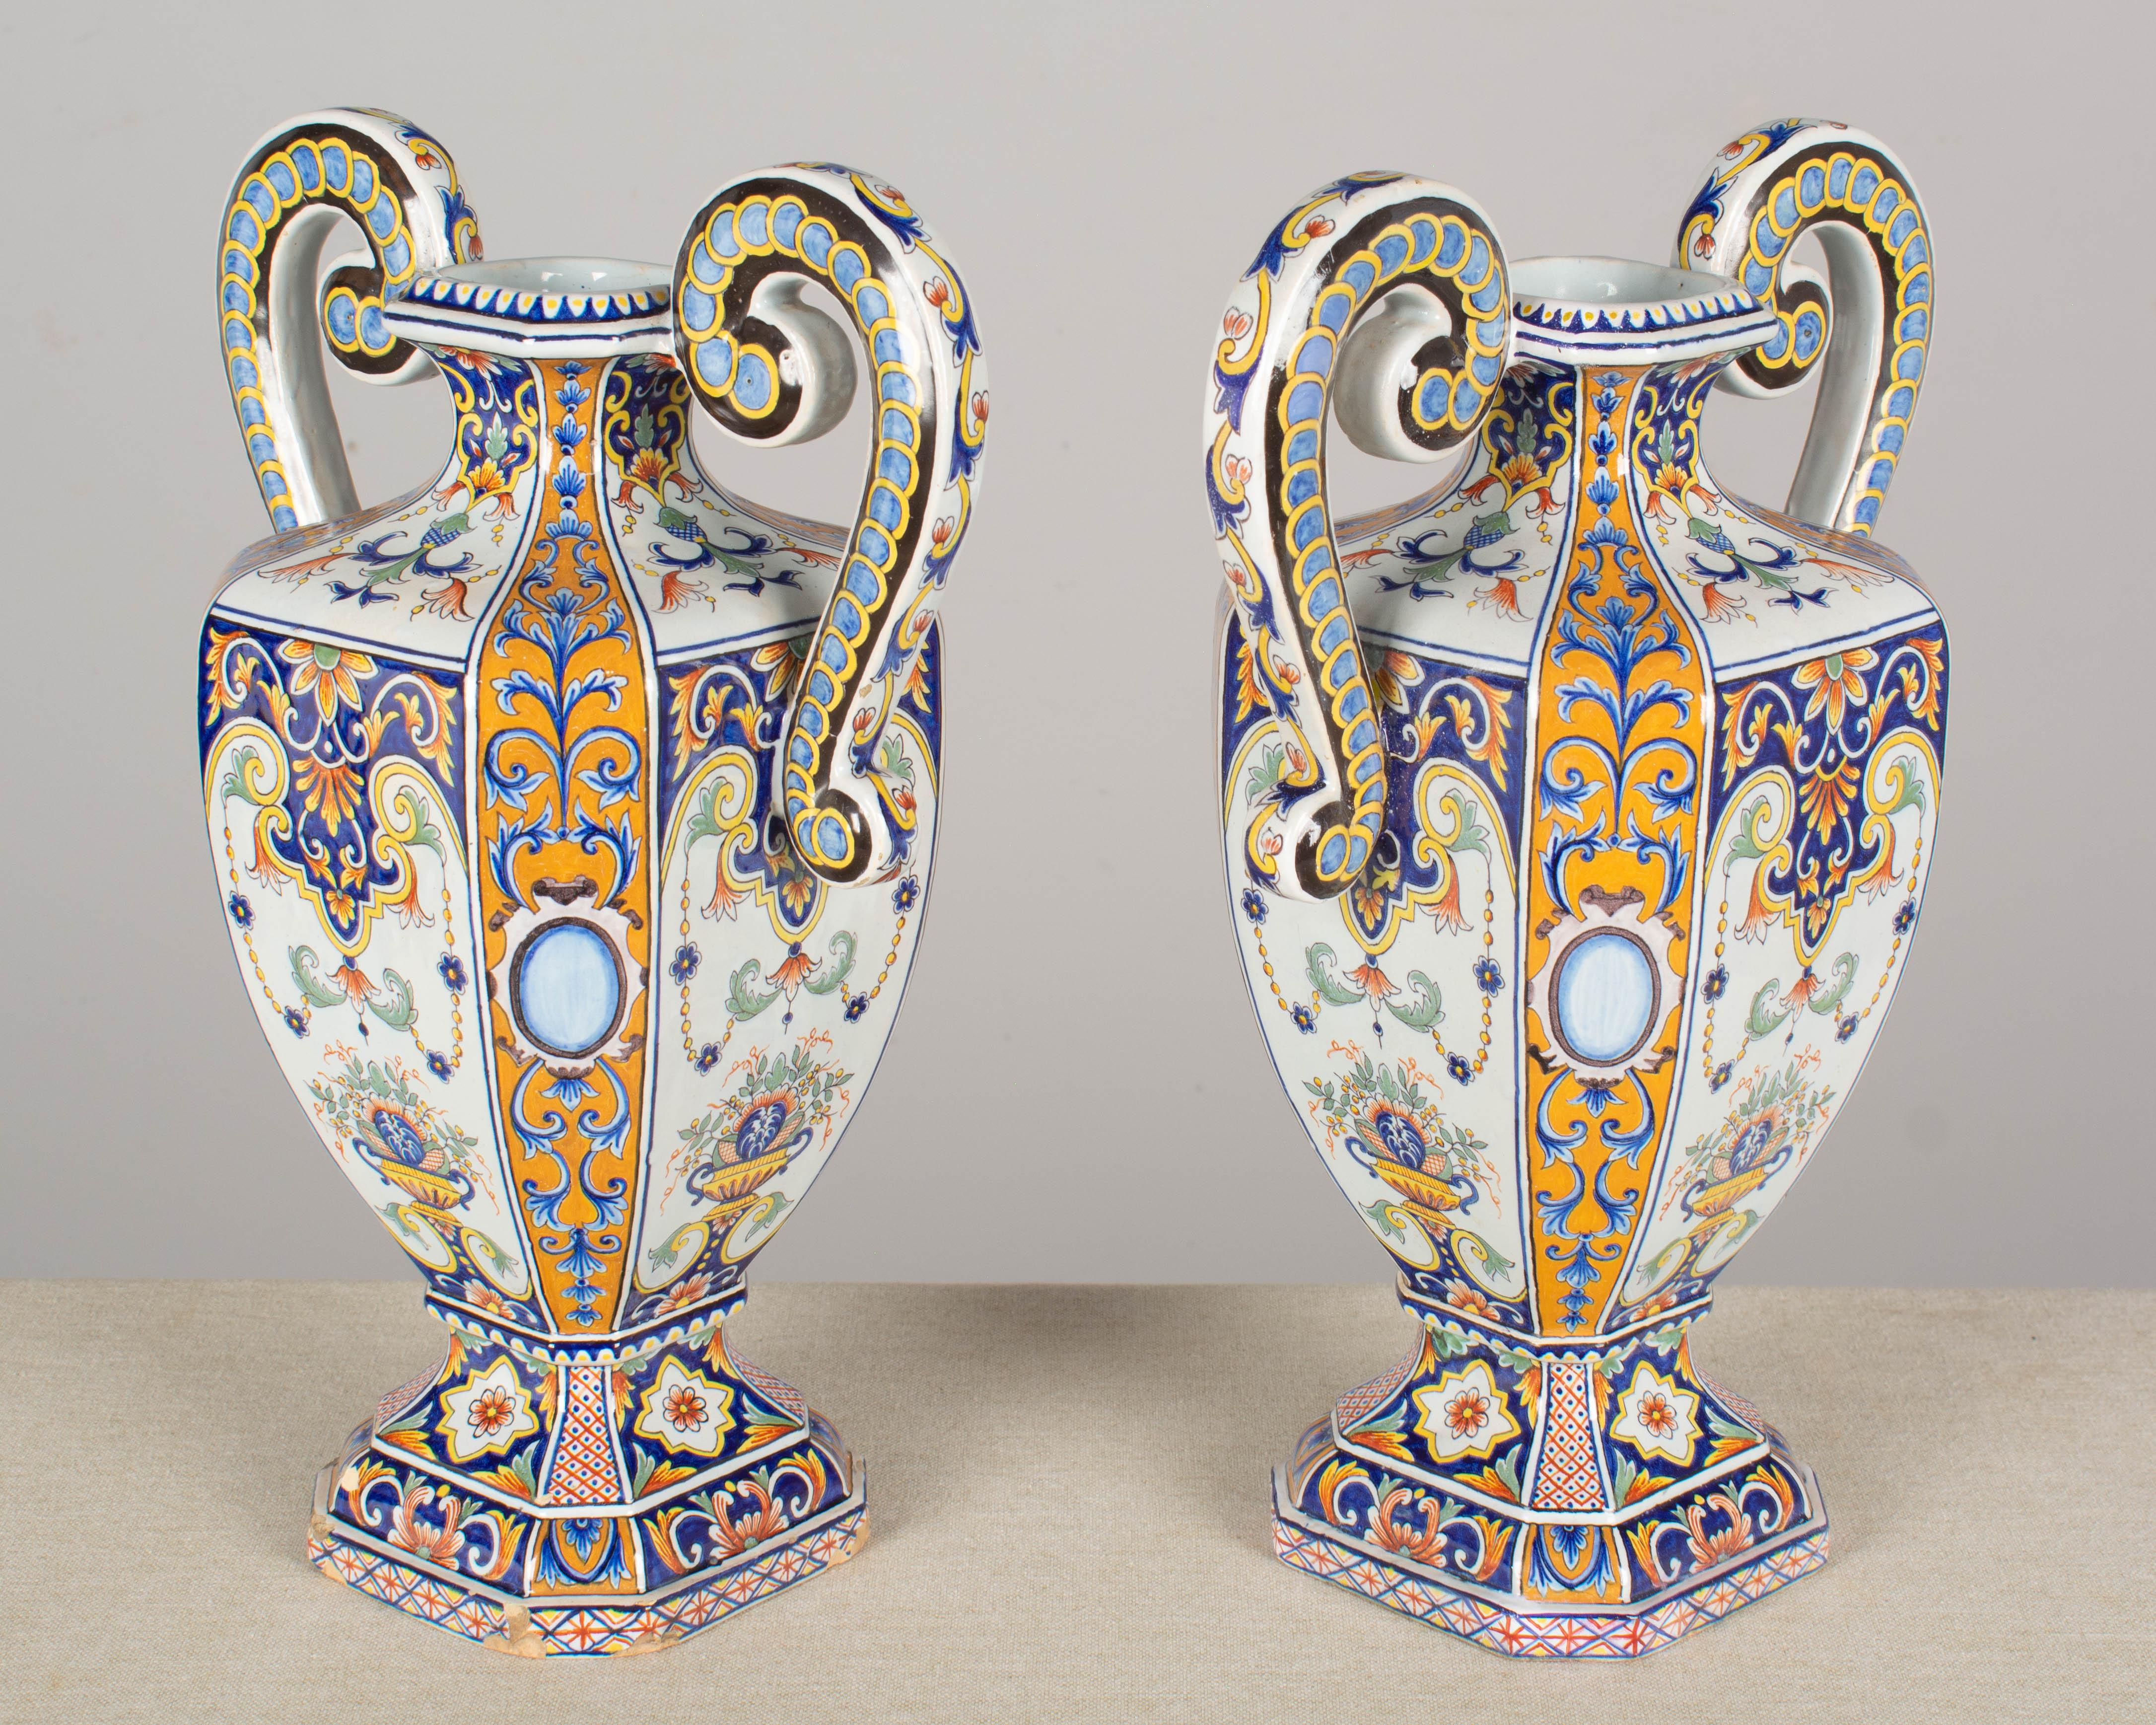 19th Century French Desvres Faience Urn Form Vases, a Pair For Sale 4